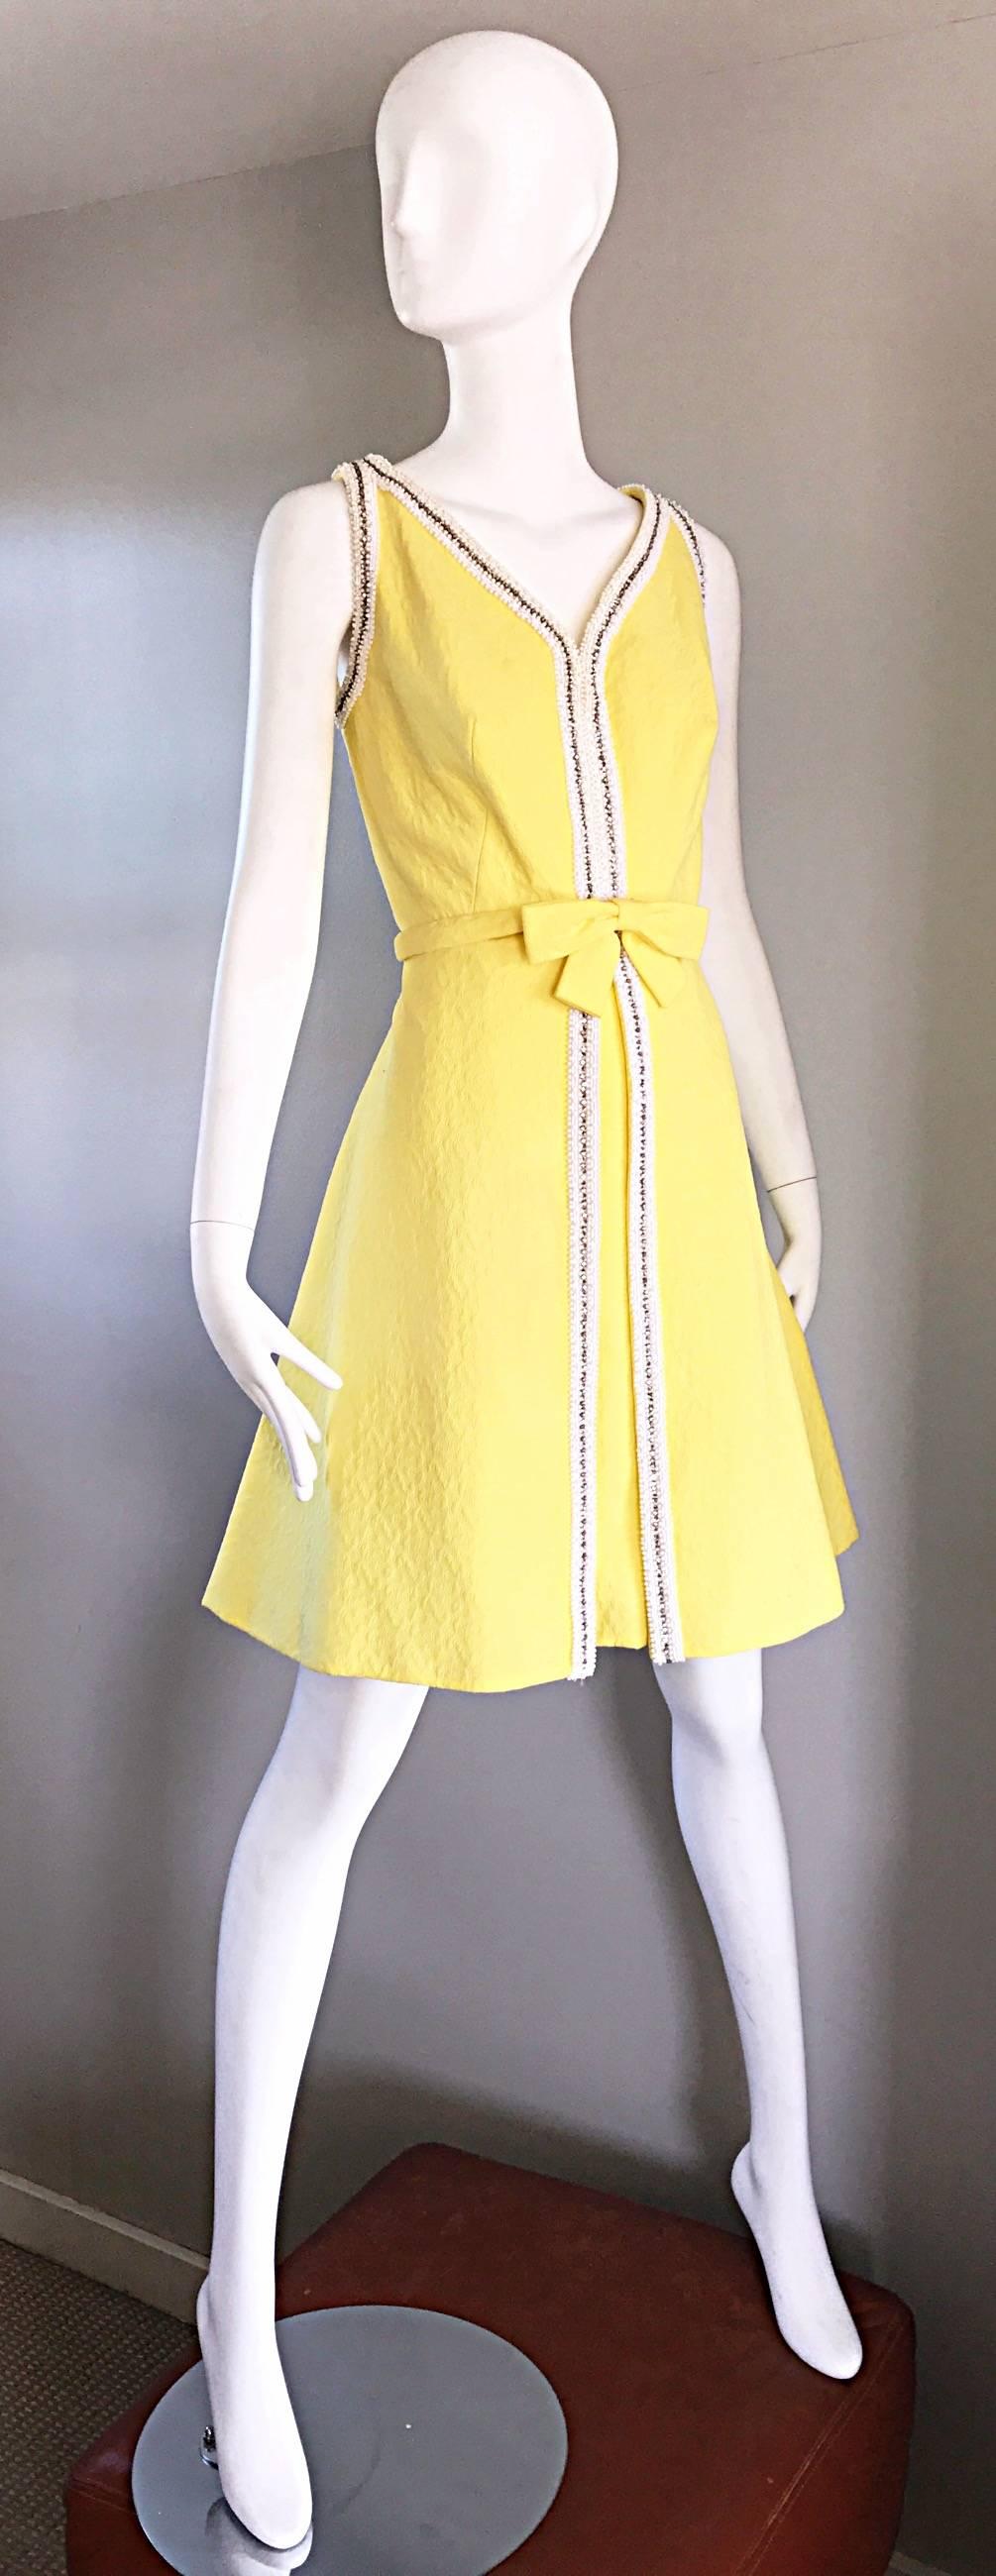 Chic 1960s Seaton Enterprises Ltd. Vintage Large Size Yellow 60s A Line Dress In Excellent Condition For Sale In San Diego, CA